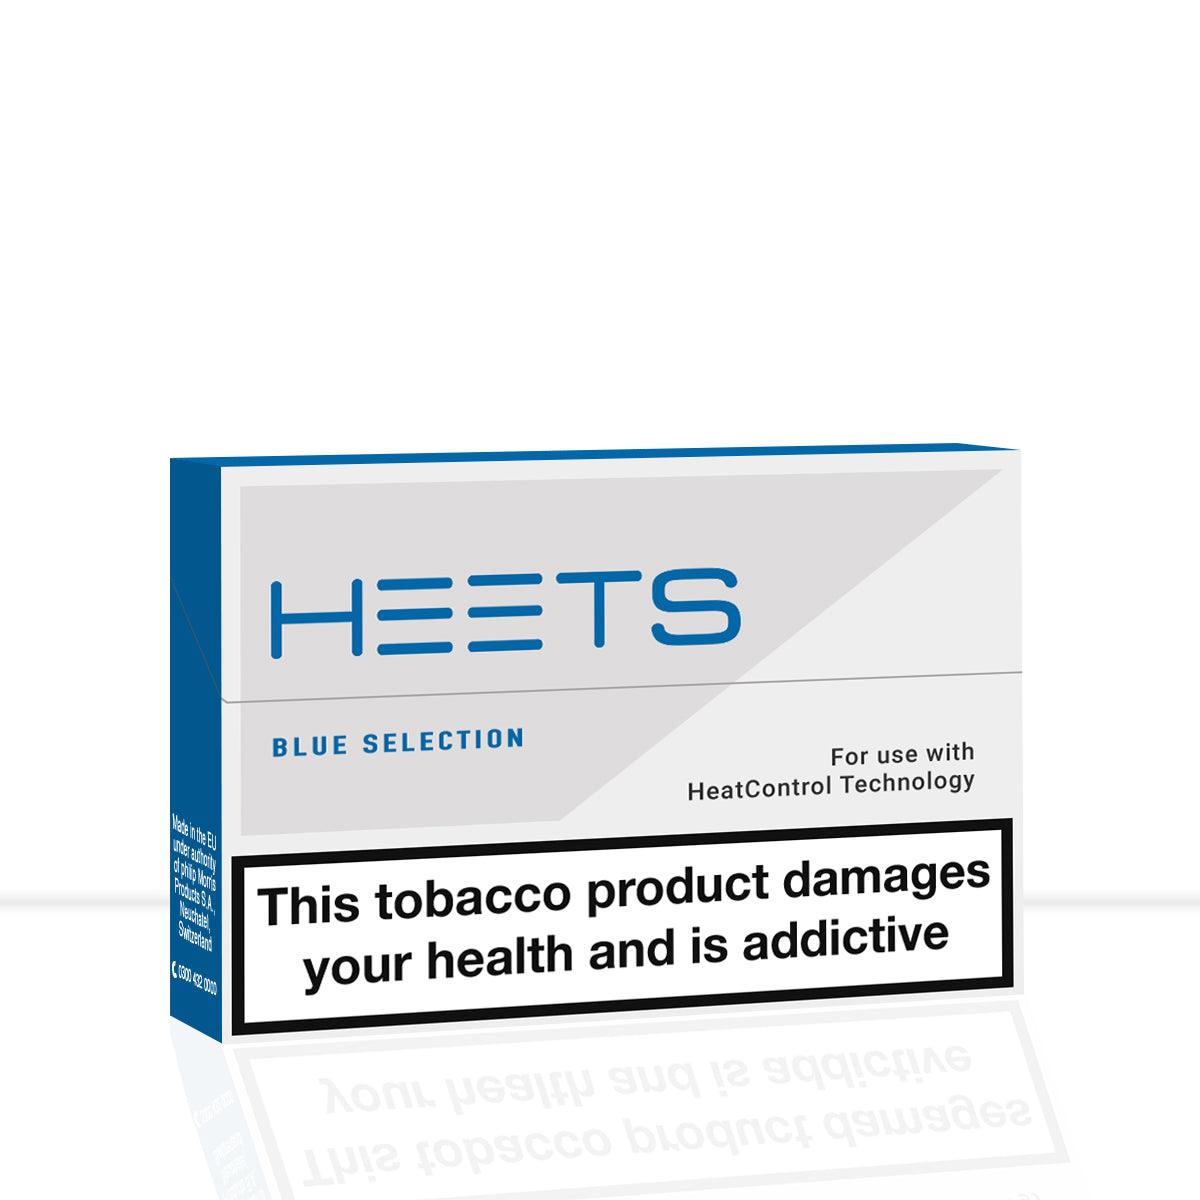 Blue Heets IQOS - Blue Heets IQOS - Heated Tobacco